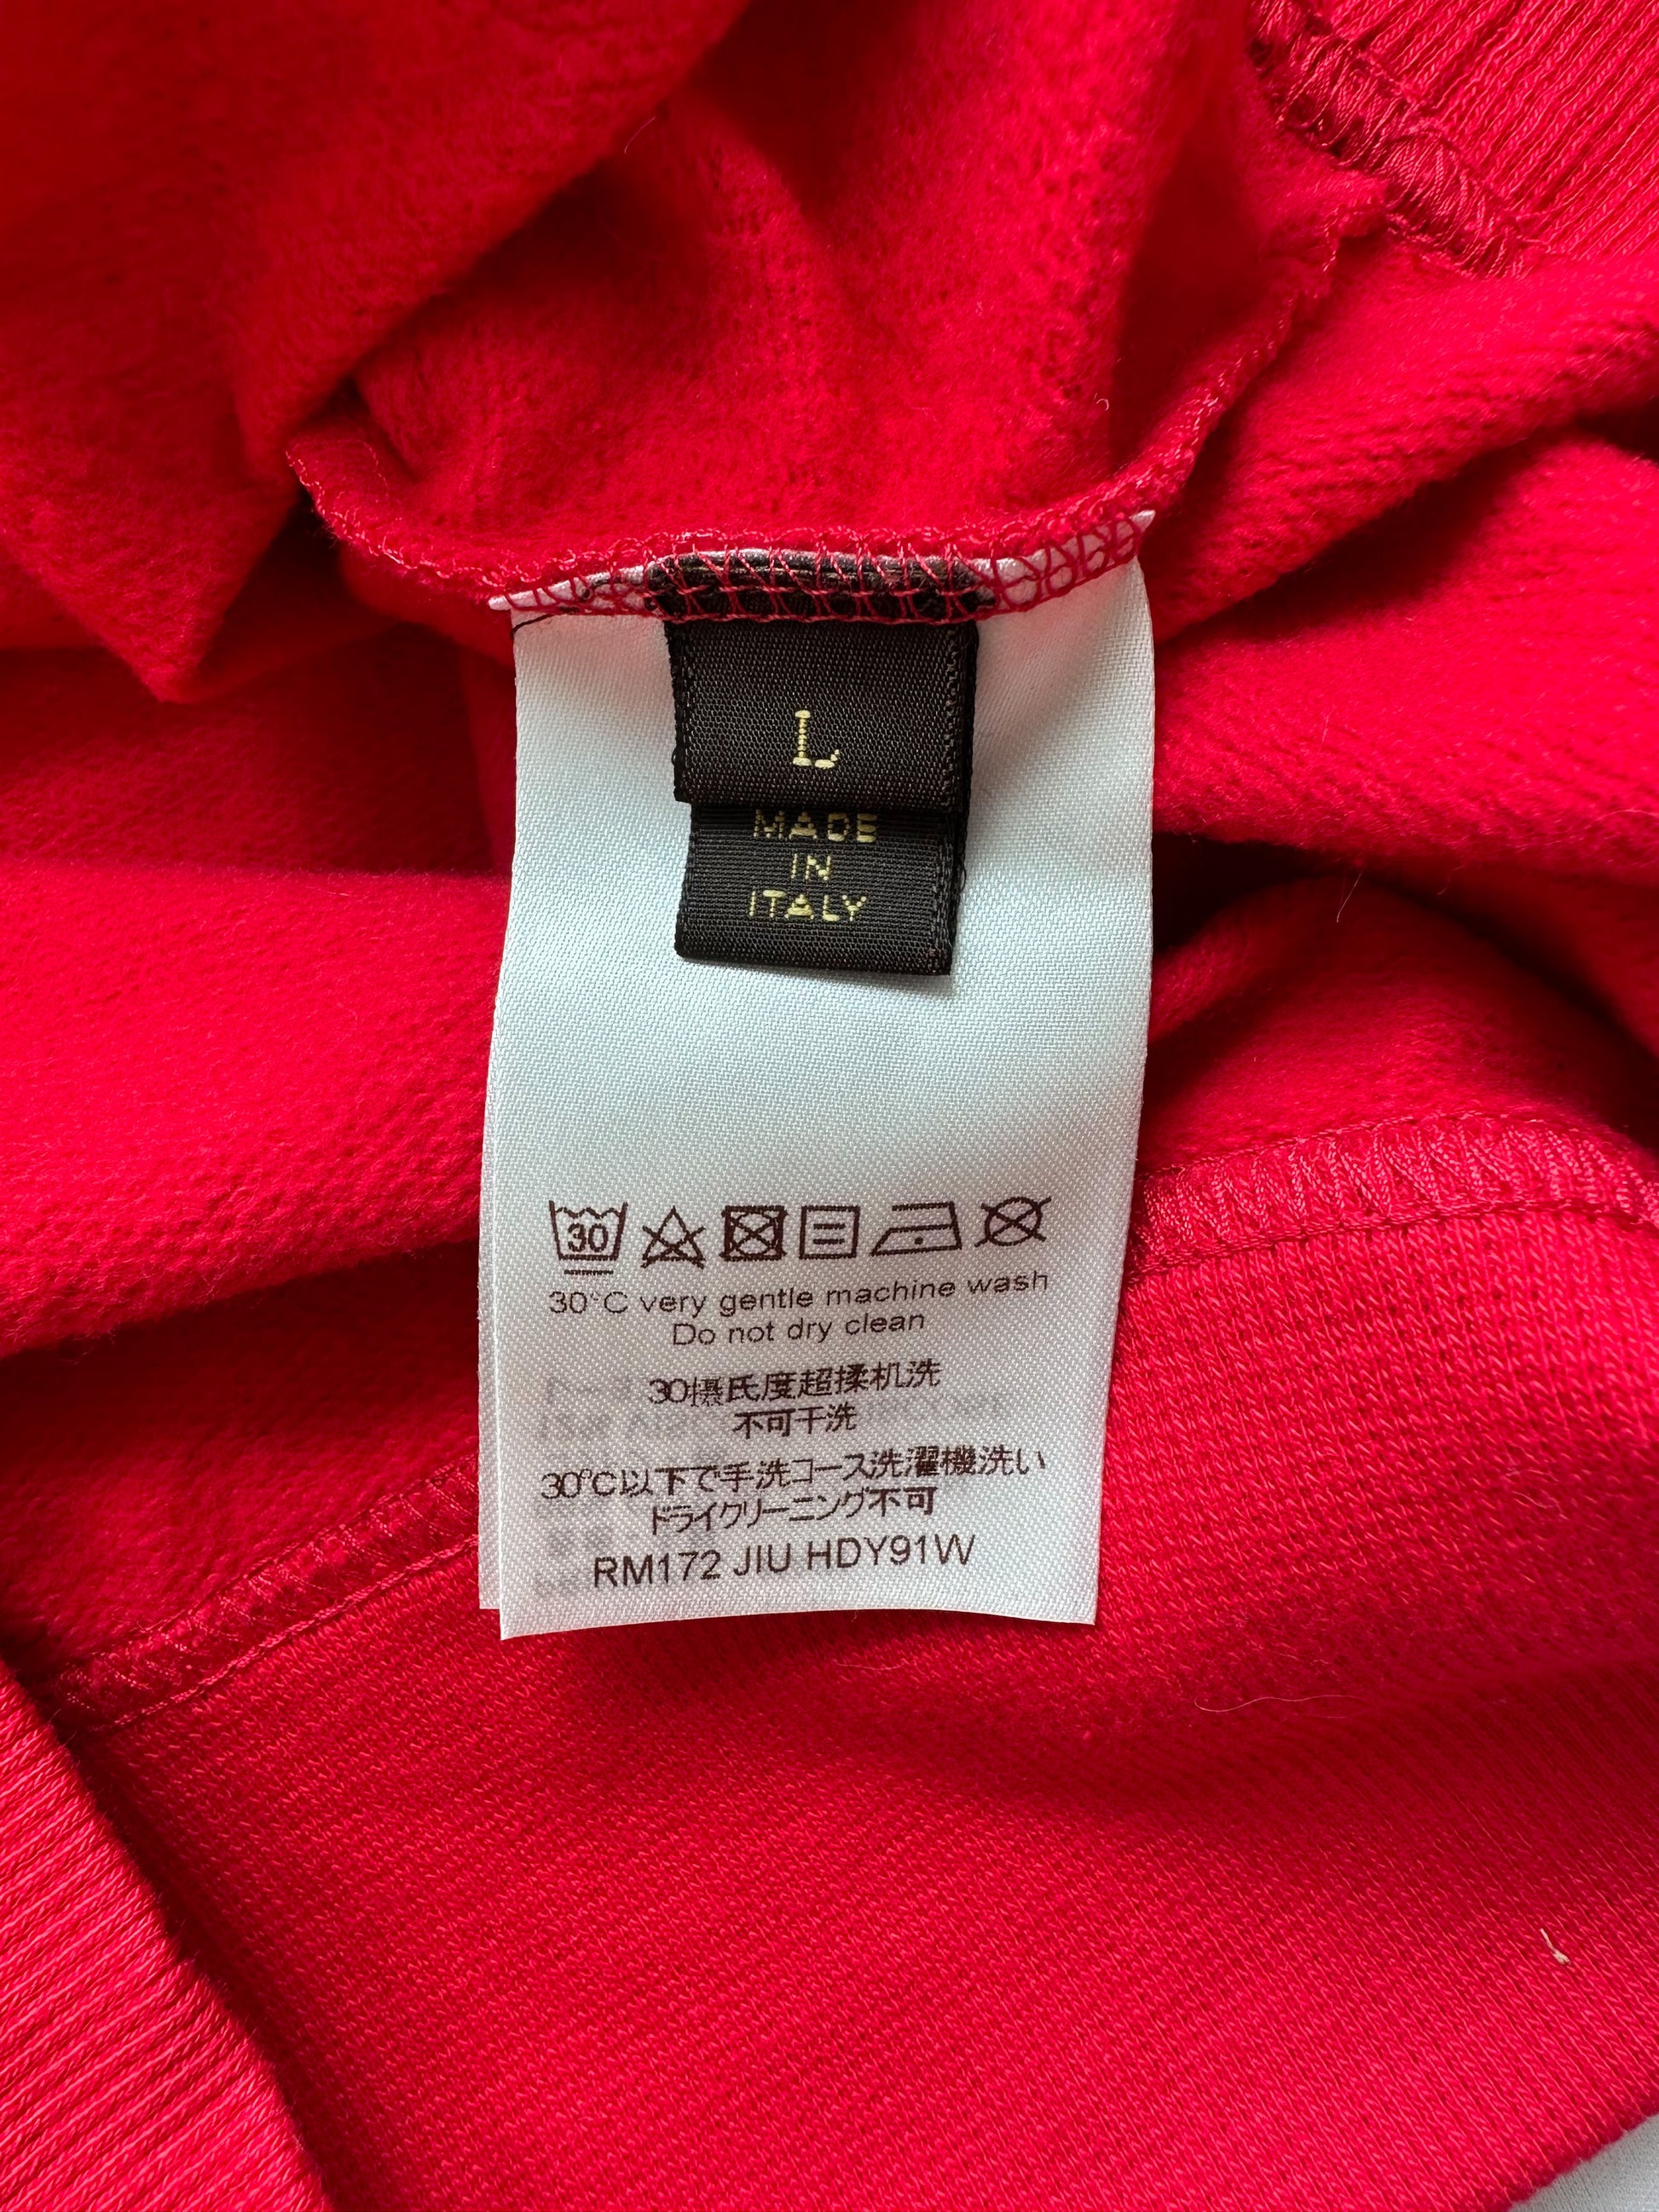 Sweatshirt Louis Vuitton x Supreme Red size 8 US in Not specified